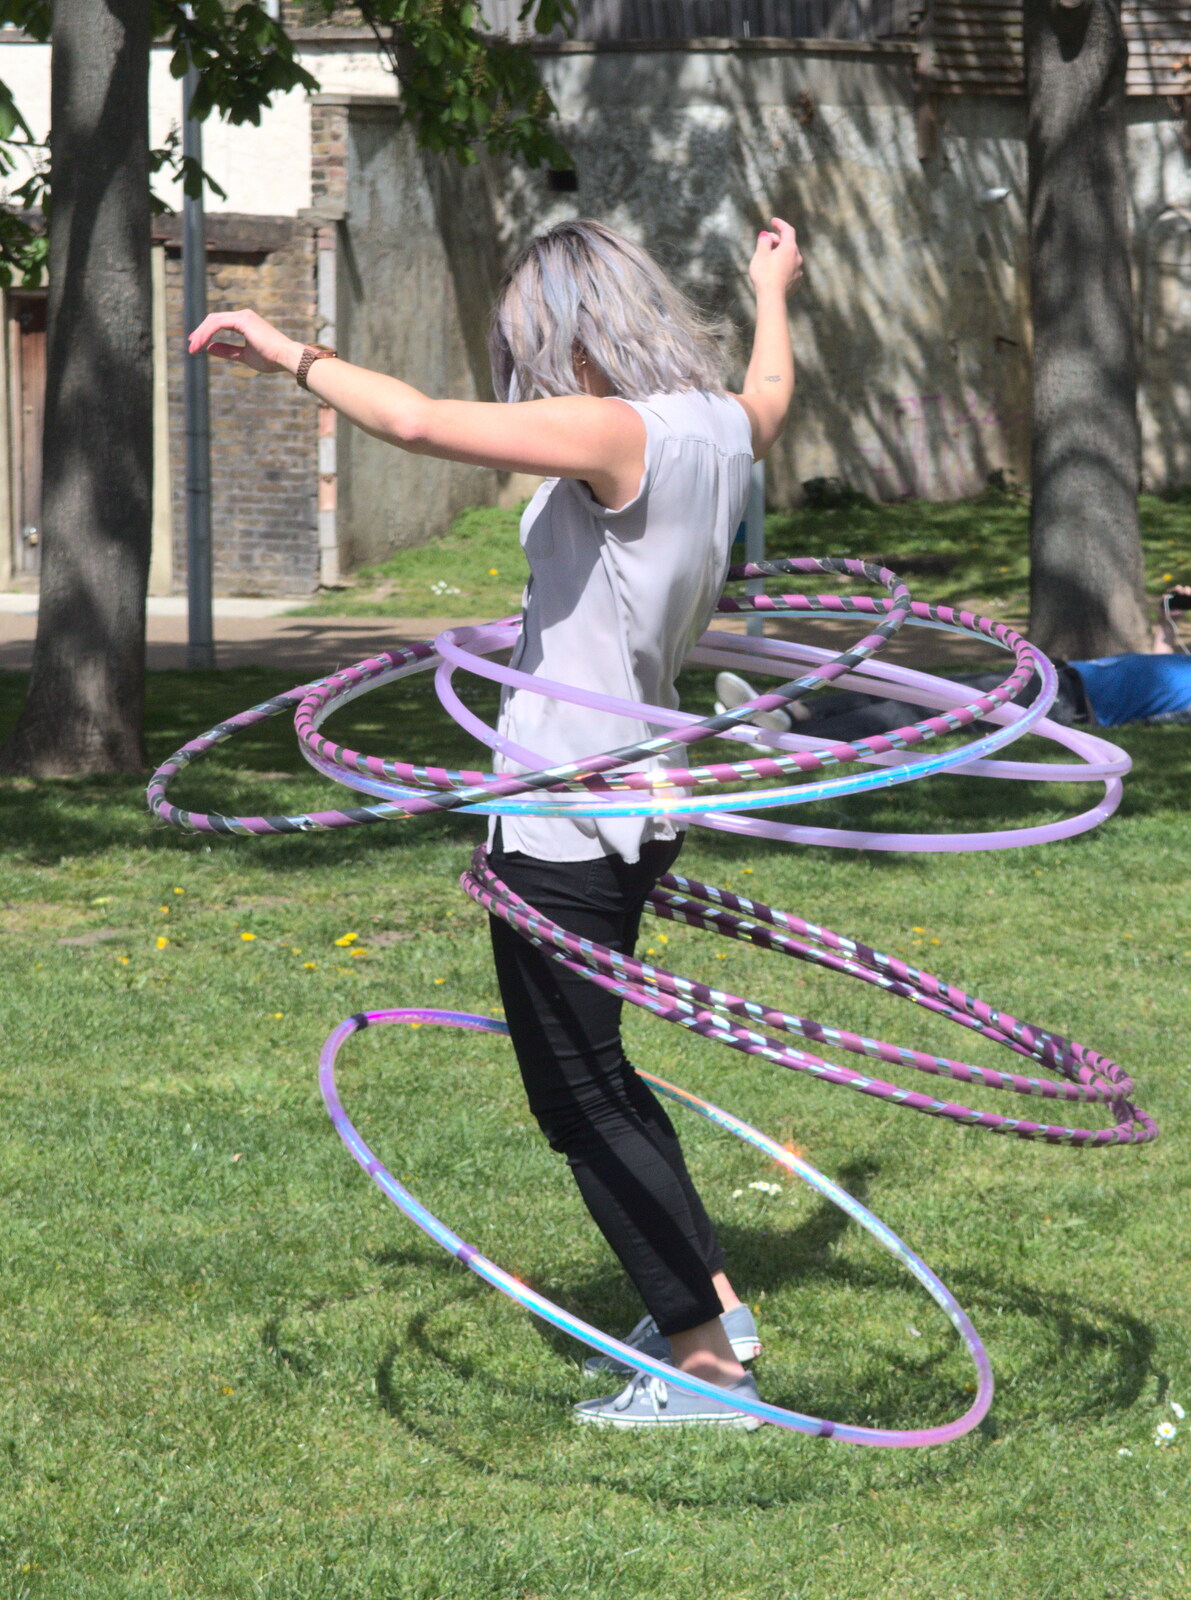 Kah-Mun shows how it's done with eight hoops from The BSCC at the Hoxne Swan, and Mint Street Hula, Suffolk and London - 4th May 2016